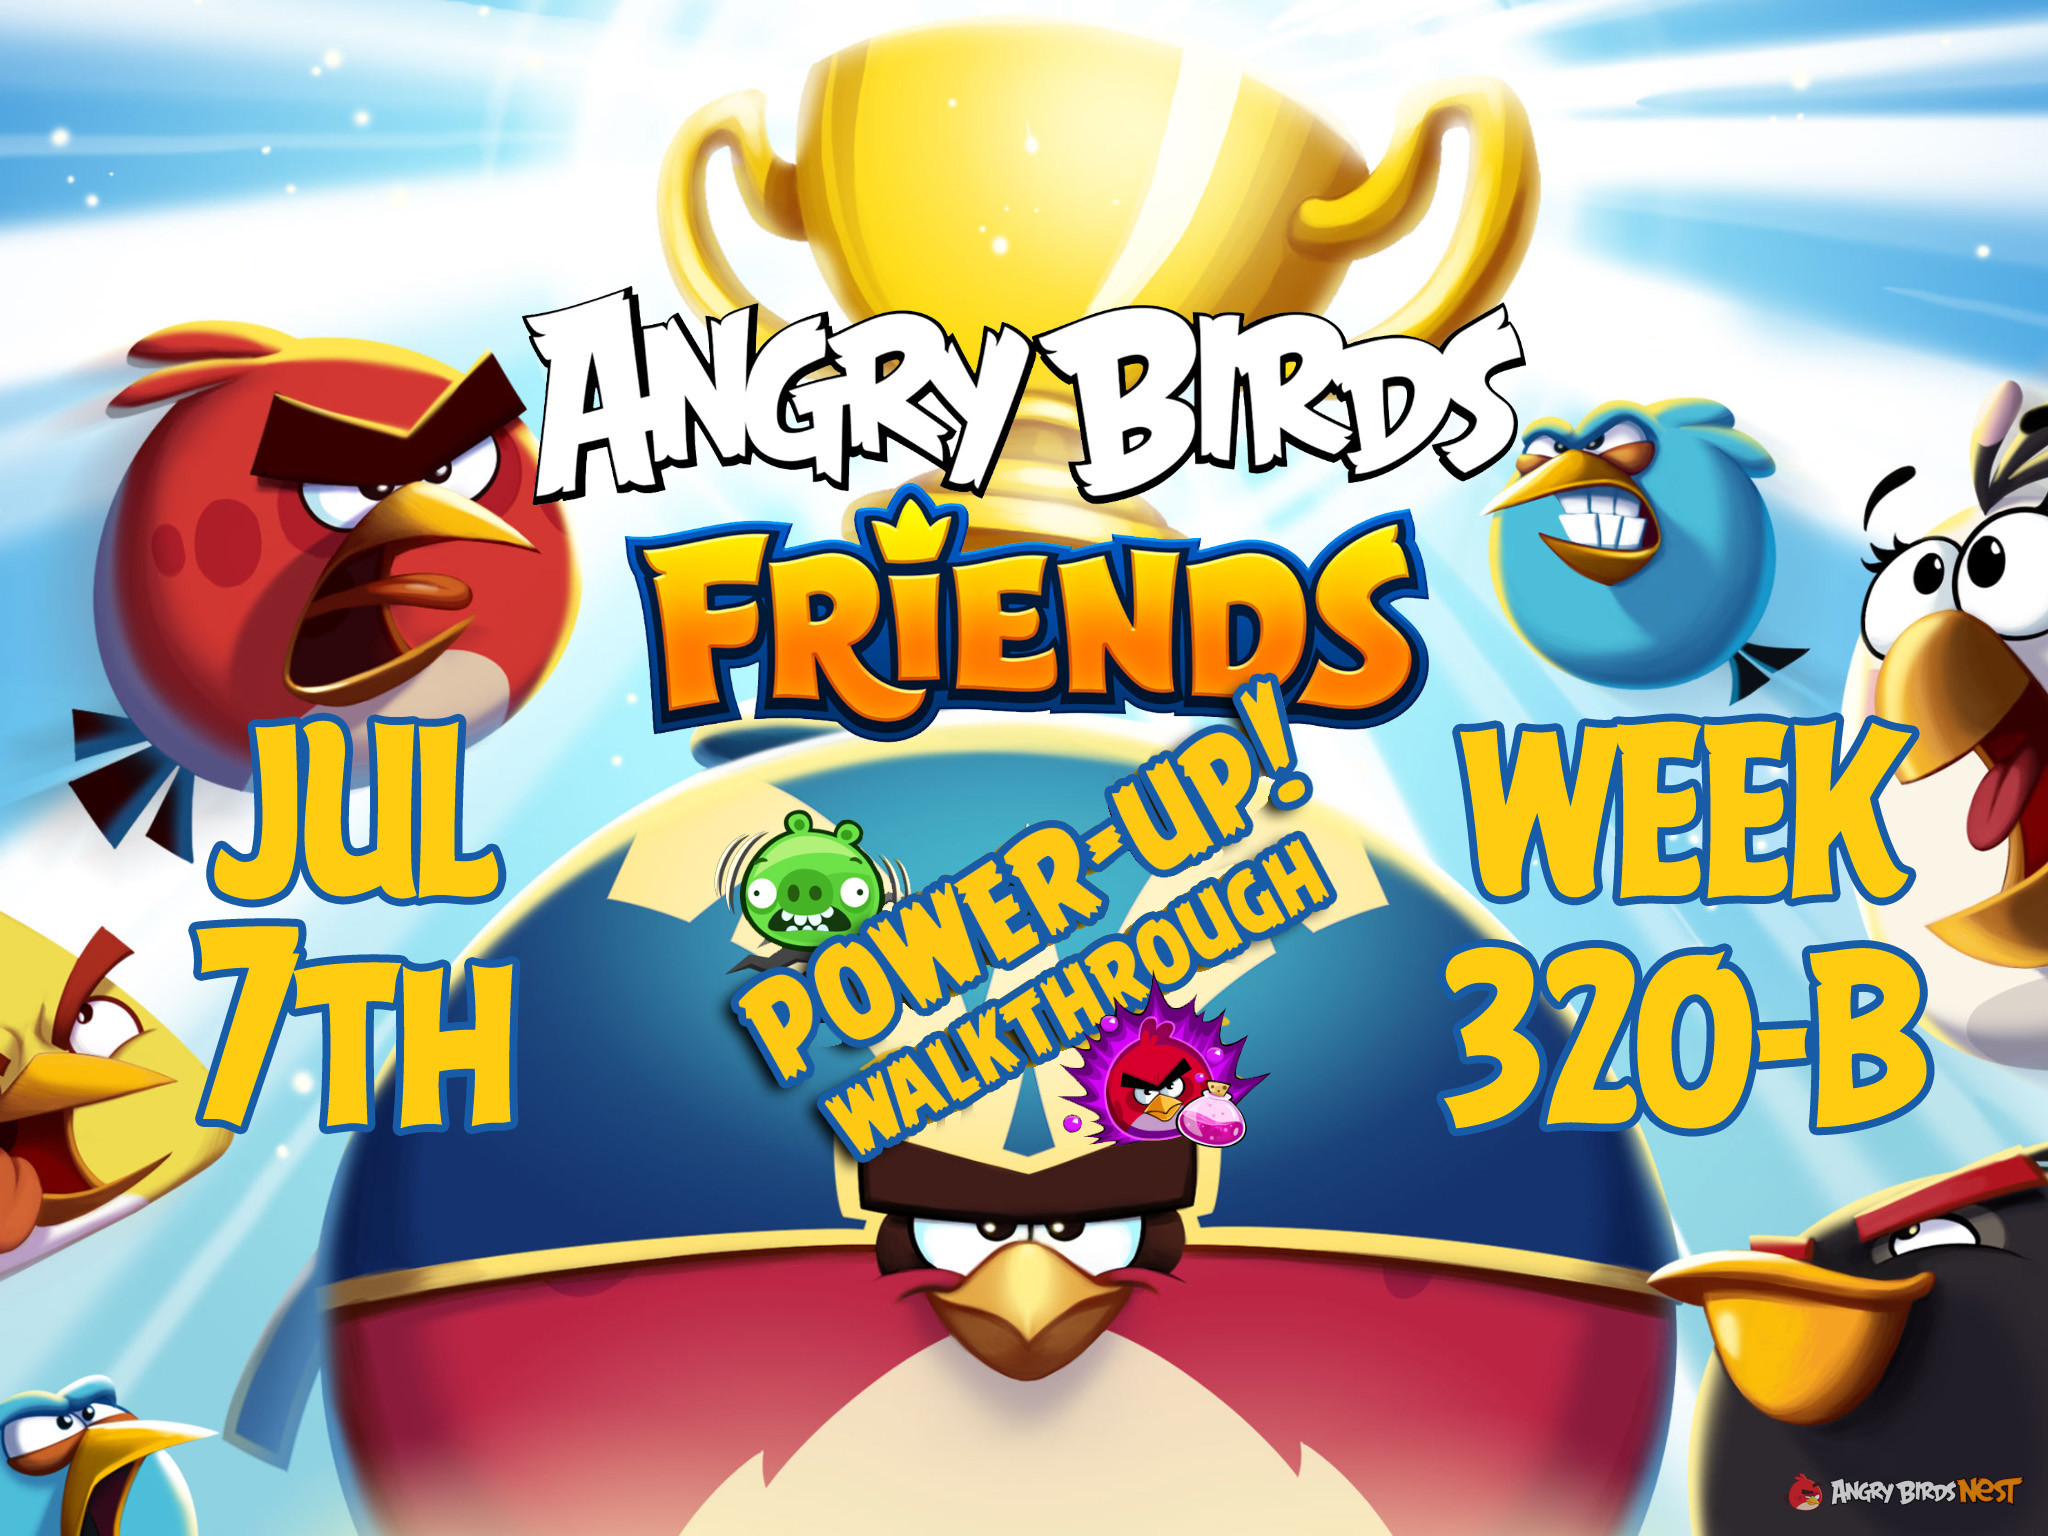 Angry-Birds-Friends-Tournament-Week-320-B-Feature-Image-PU